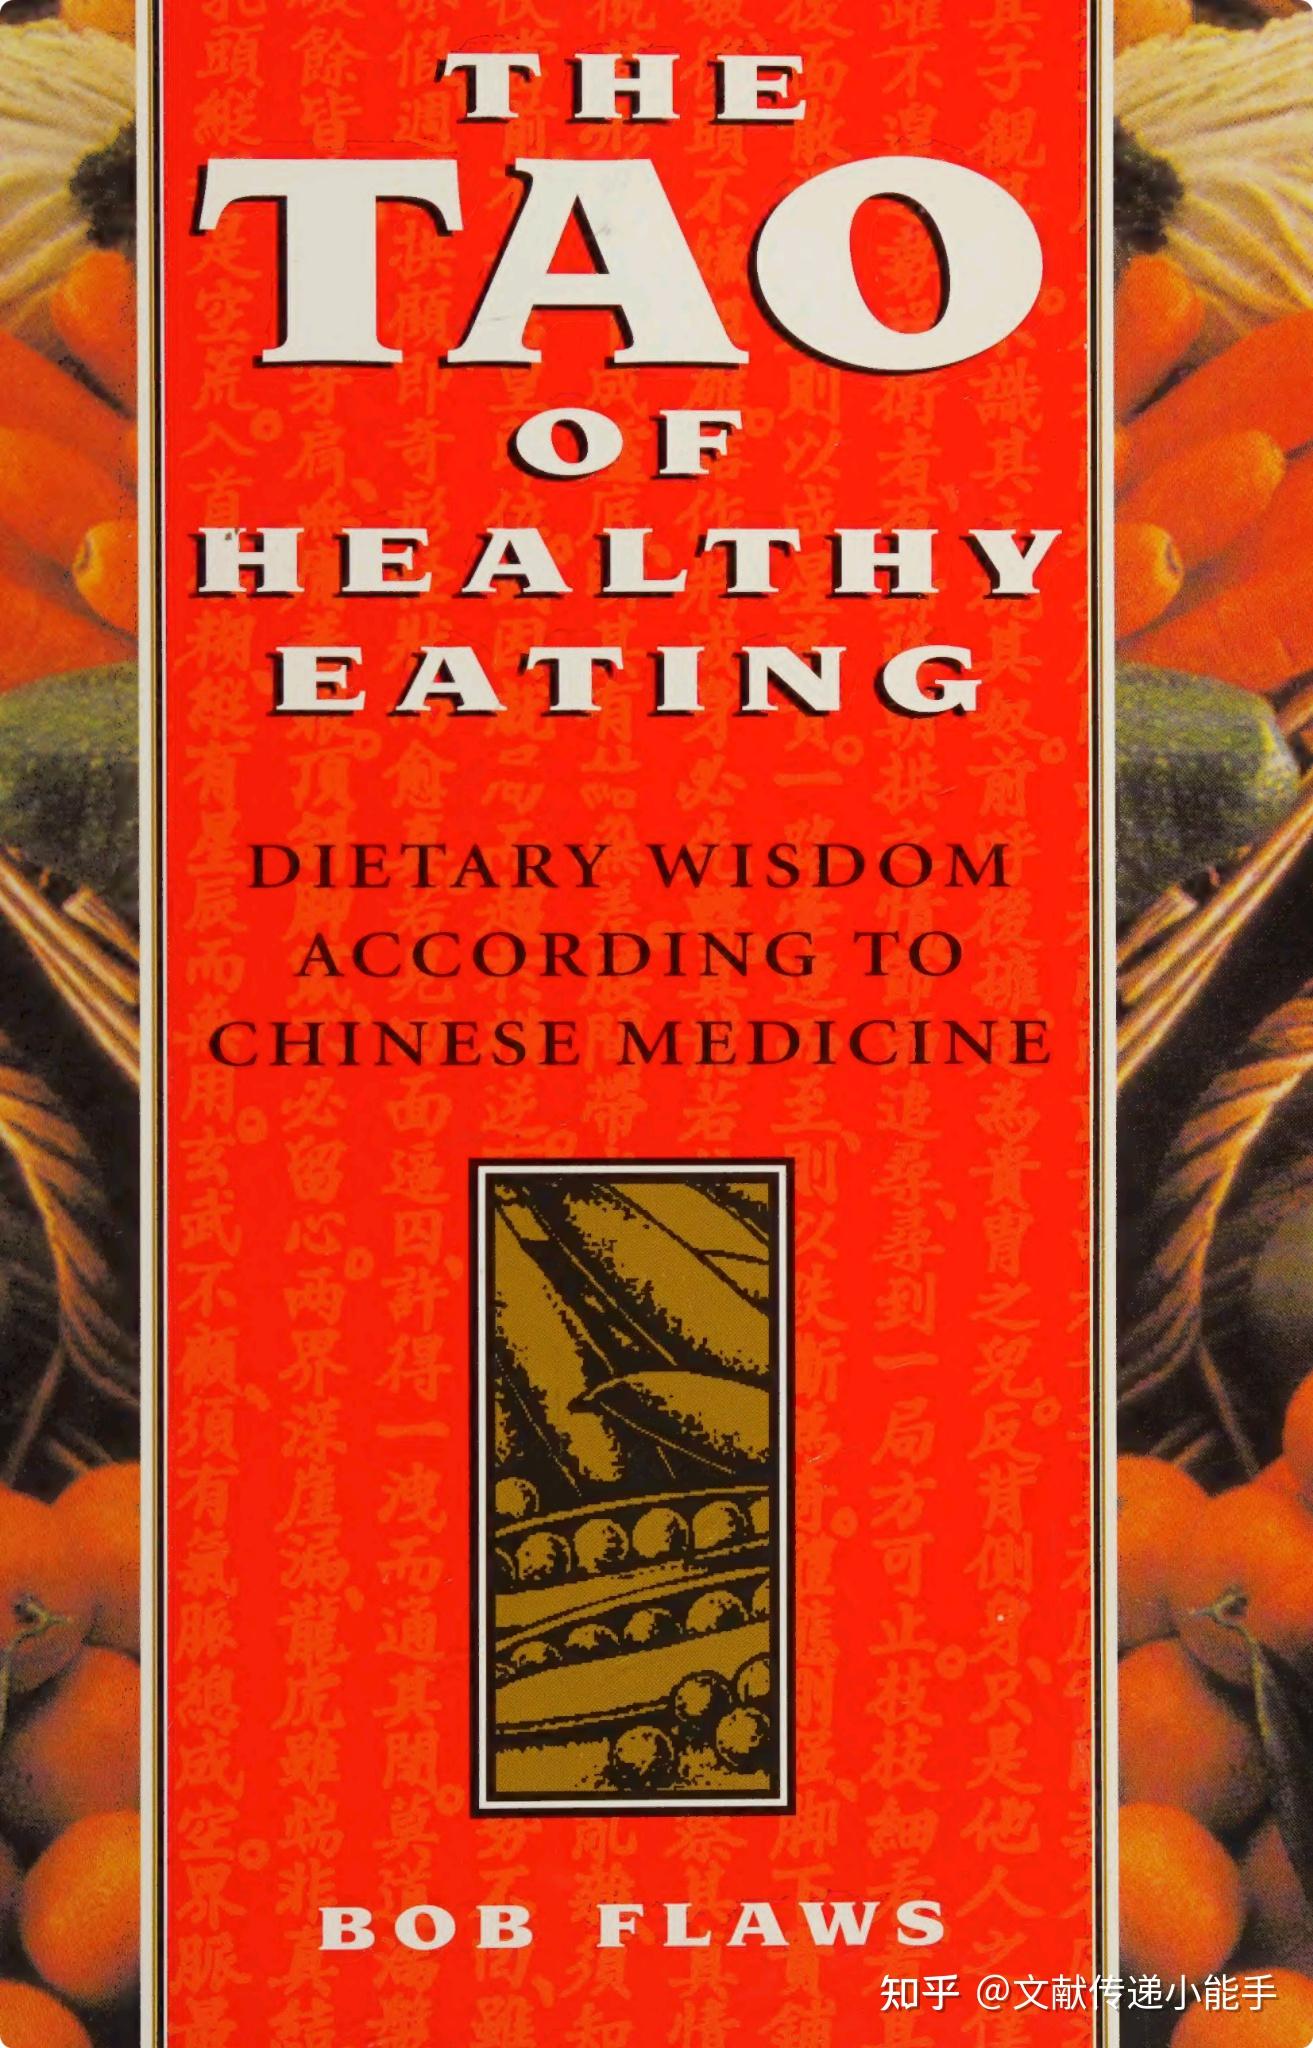 The Tao Of Healthy Eating ：dietary Wisdom According To Chinese Medicine